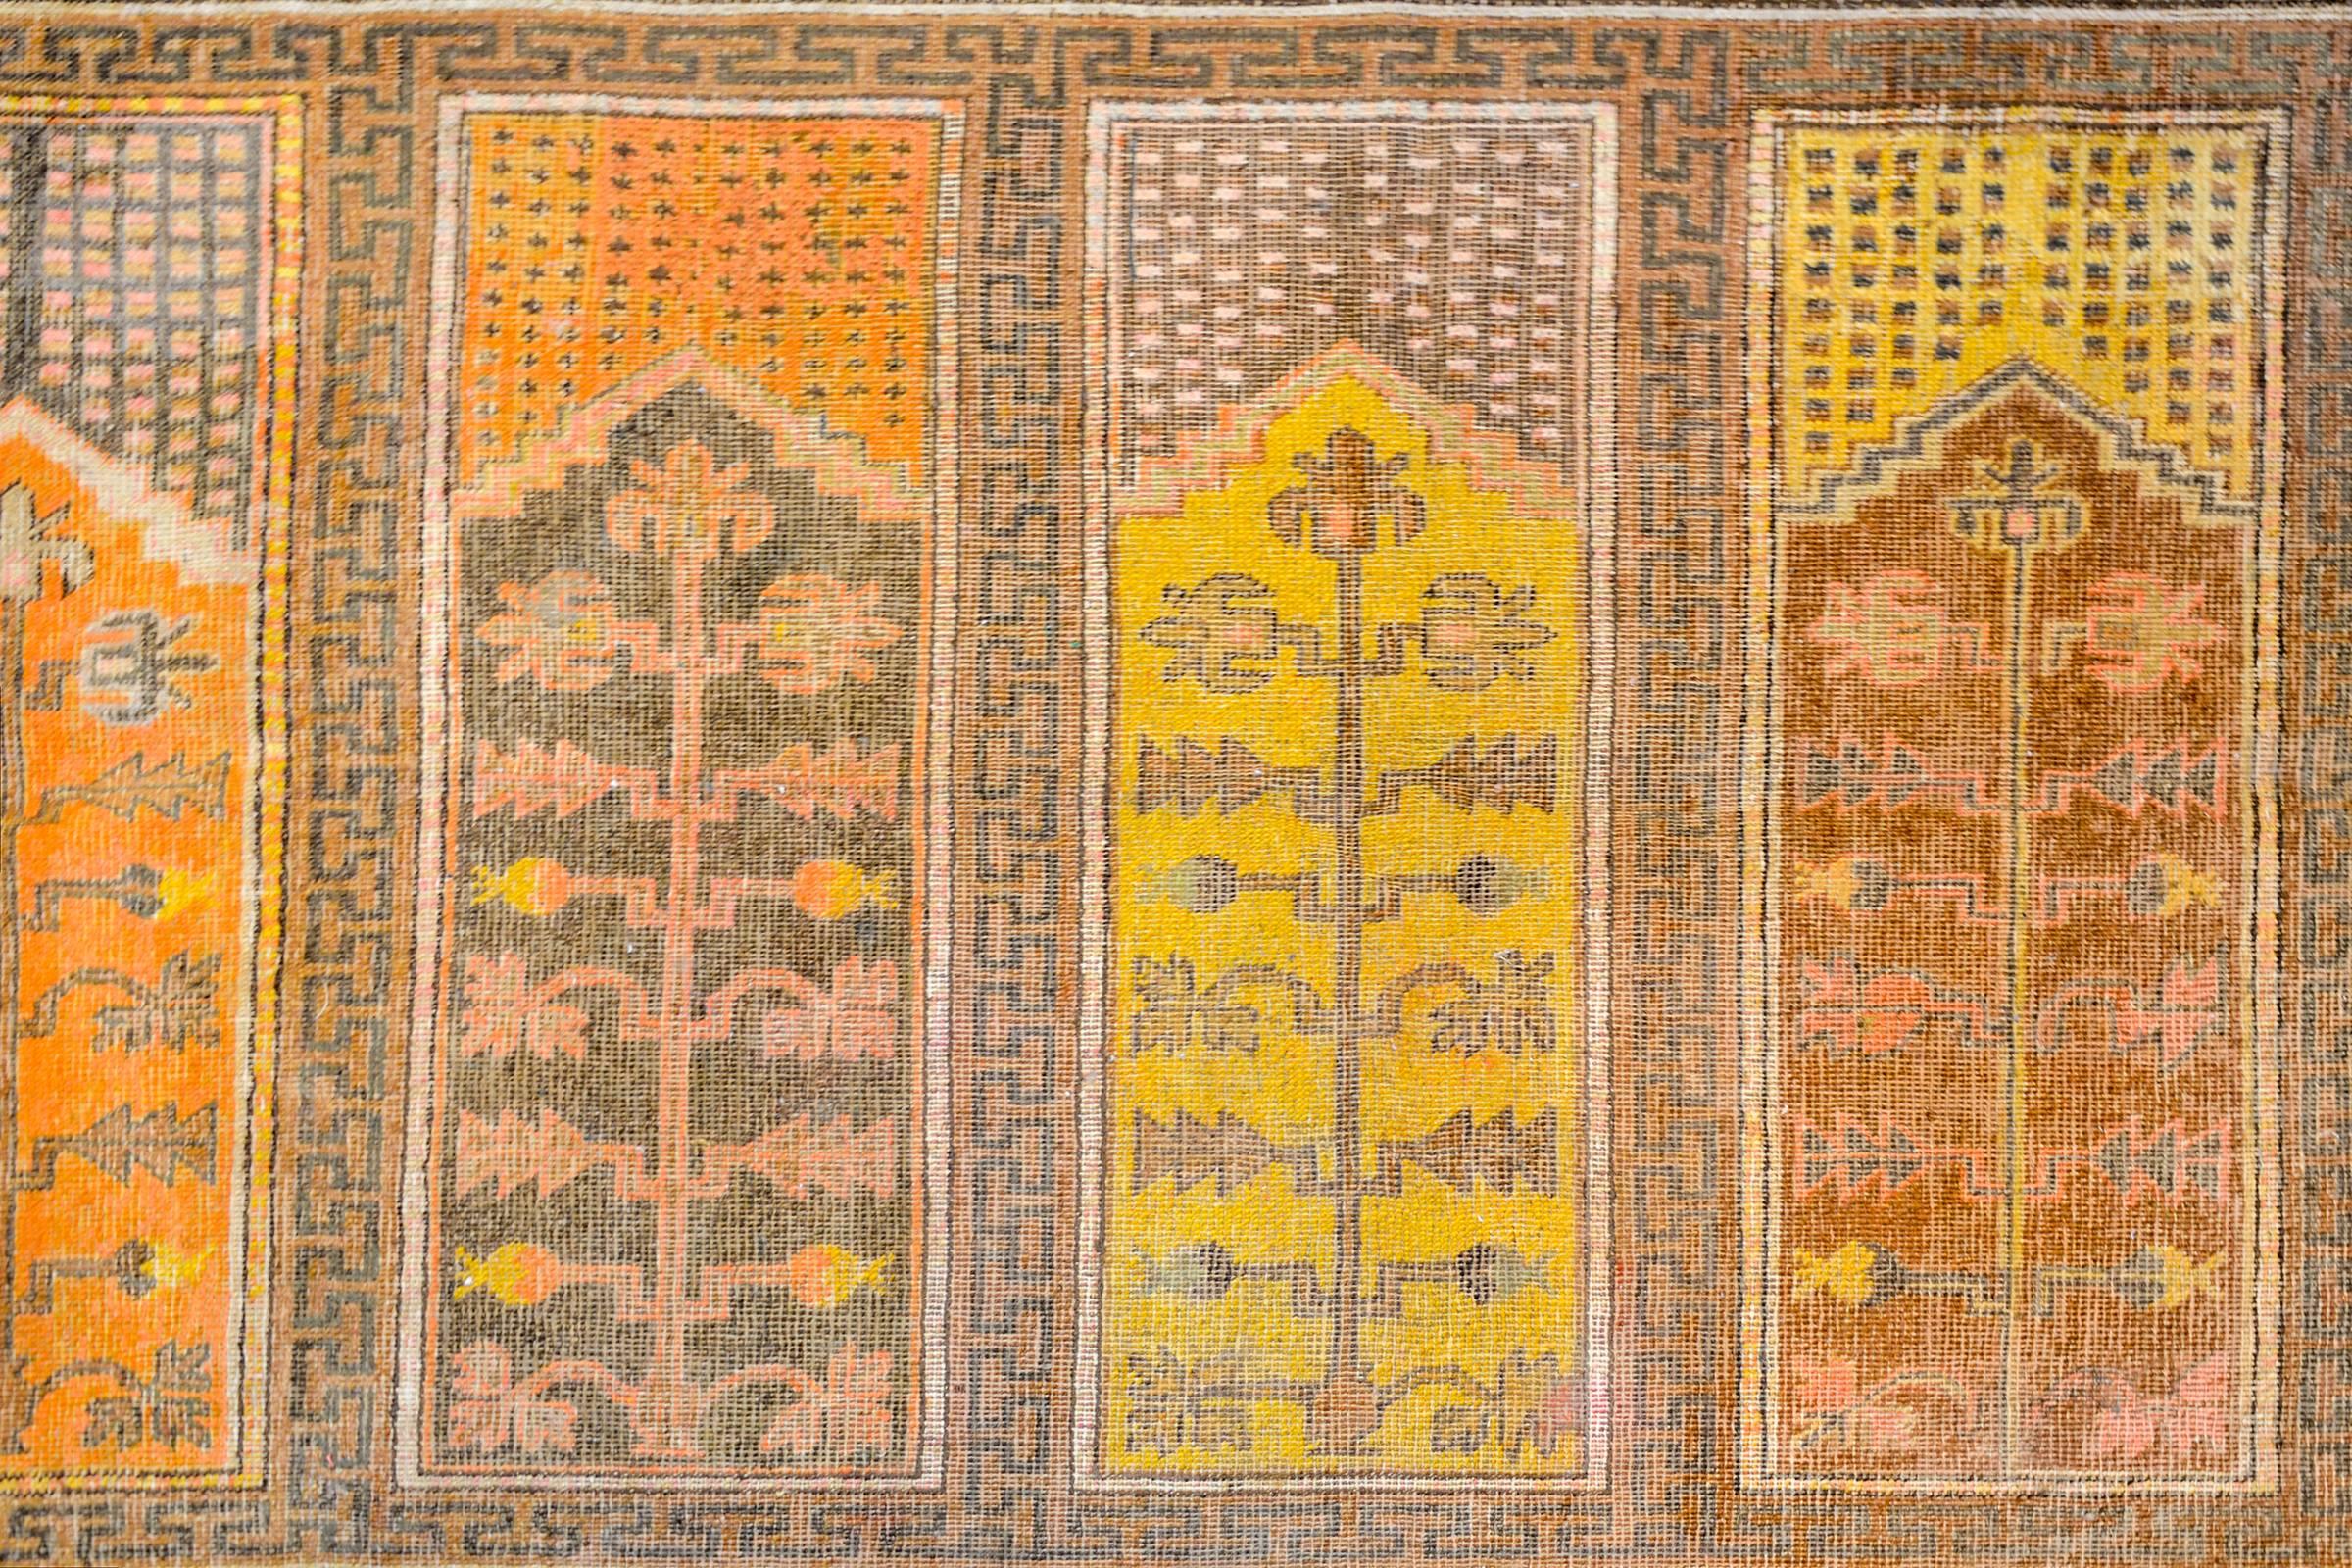 A unique early 20th century Central Asian pictorial Khotan rug with six panels, each depicting a blossoming tree woven in a different color of vegetable dyed wool. The border is fantastic with an inner stripe containing Chinese Shou characters, and